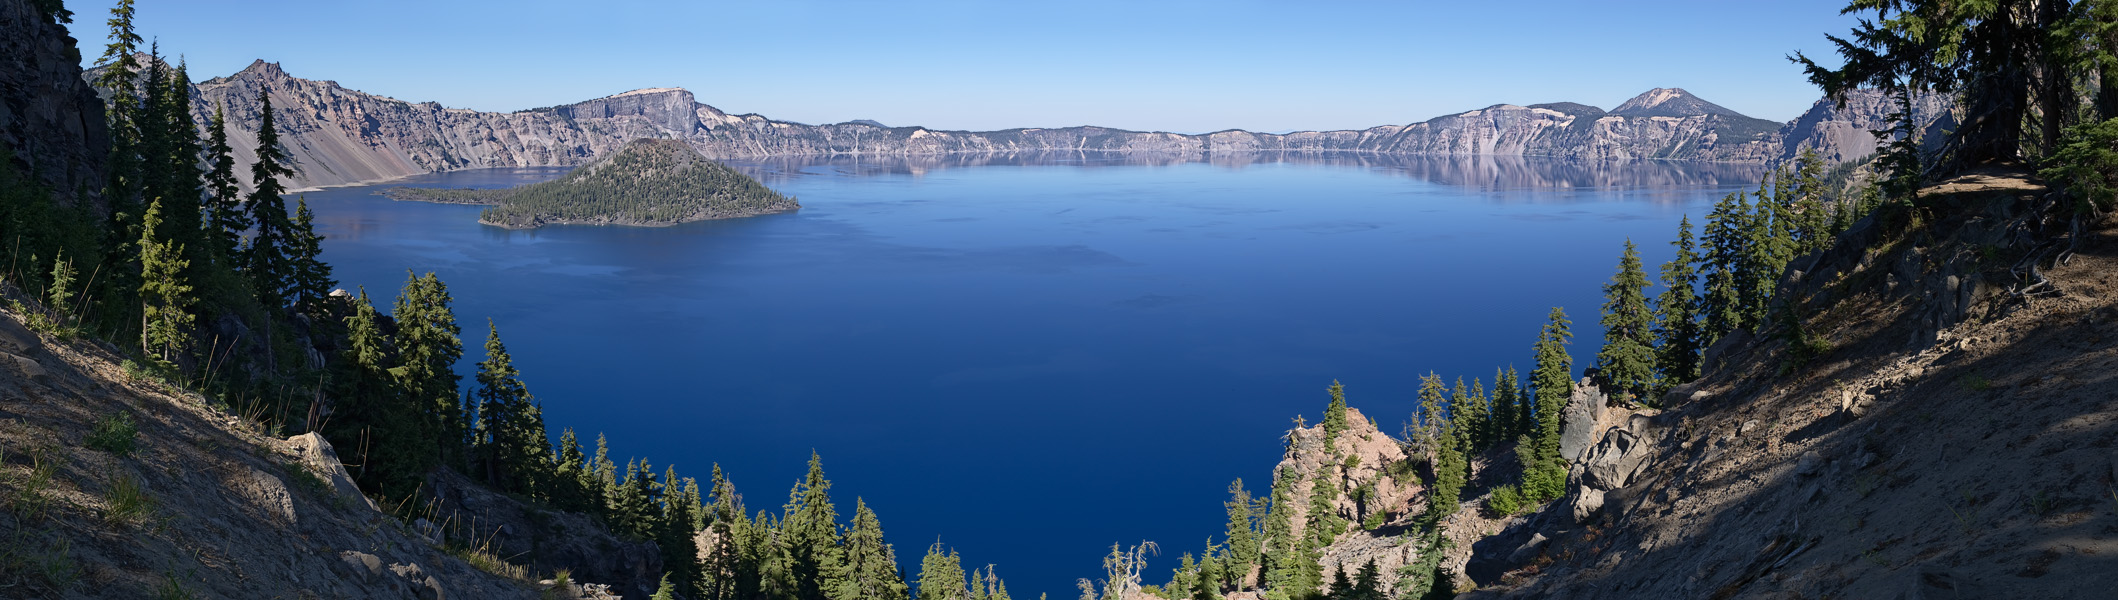 Crater Lake from the Southeast